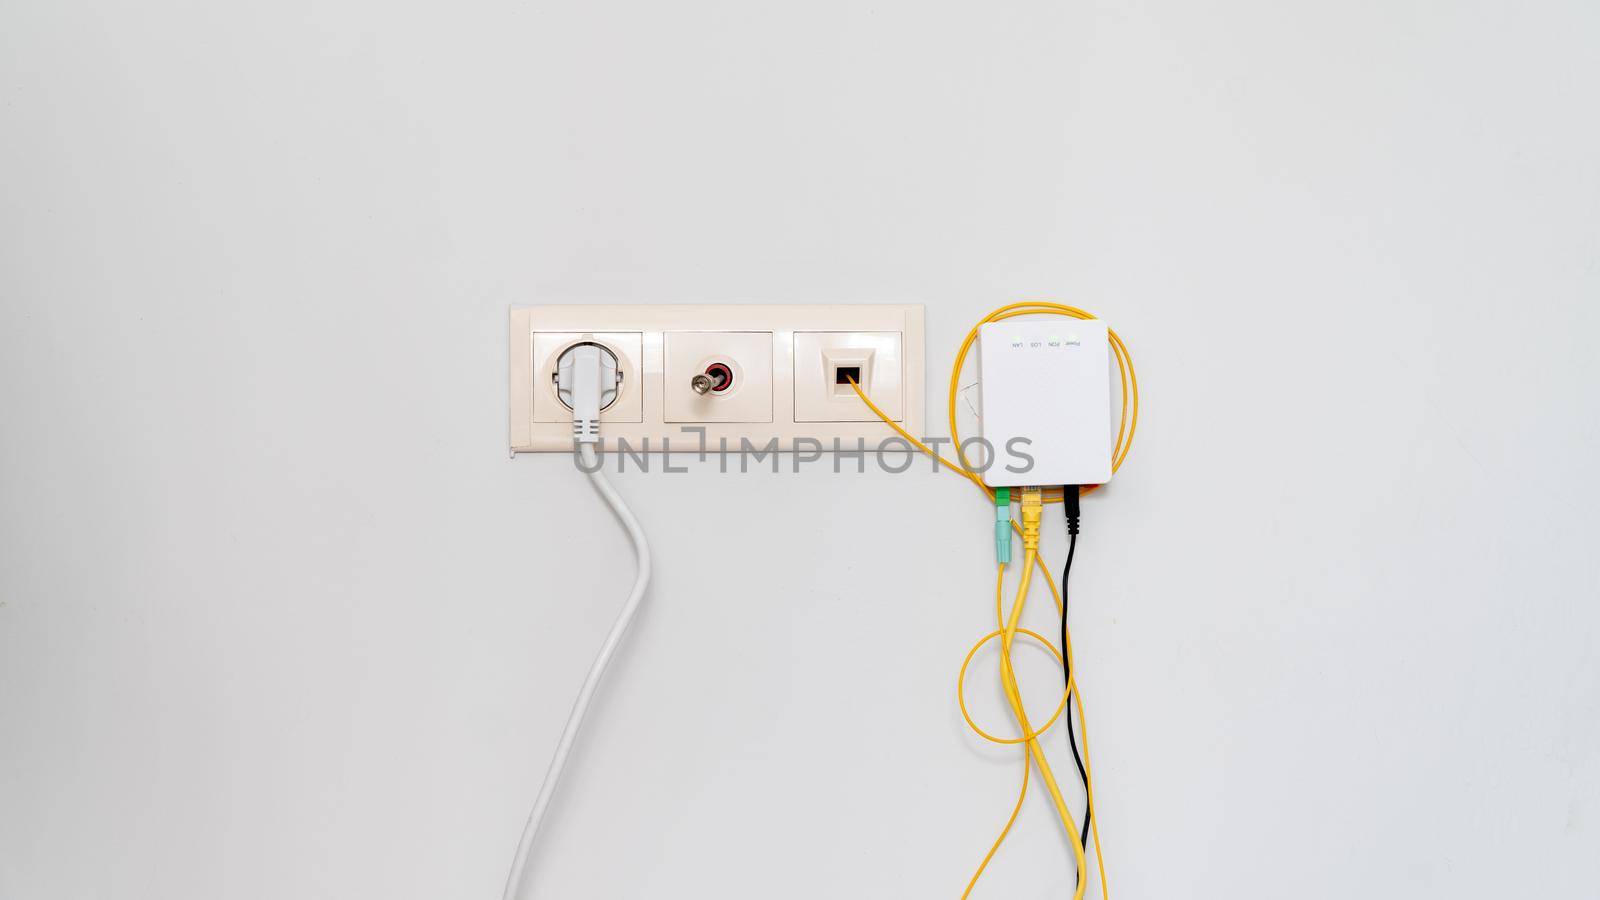 Socket with tangled wires, cables and Internet router on a white background by voktybre